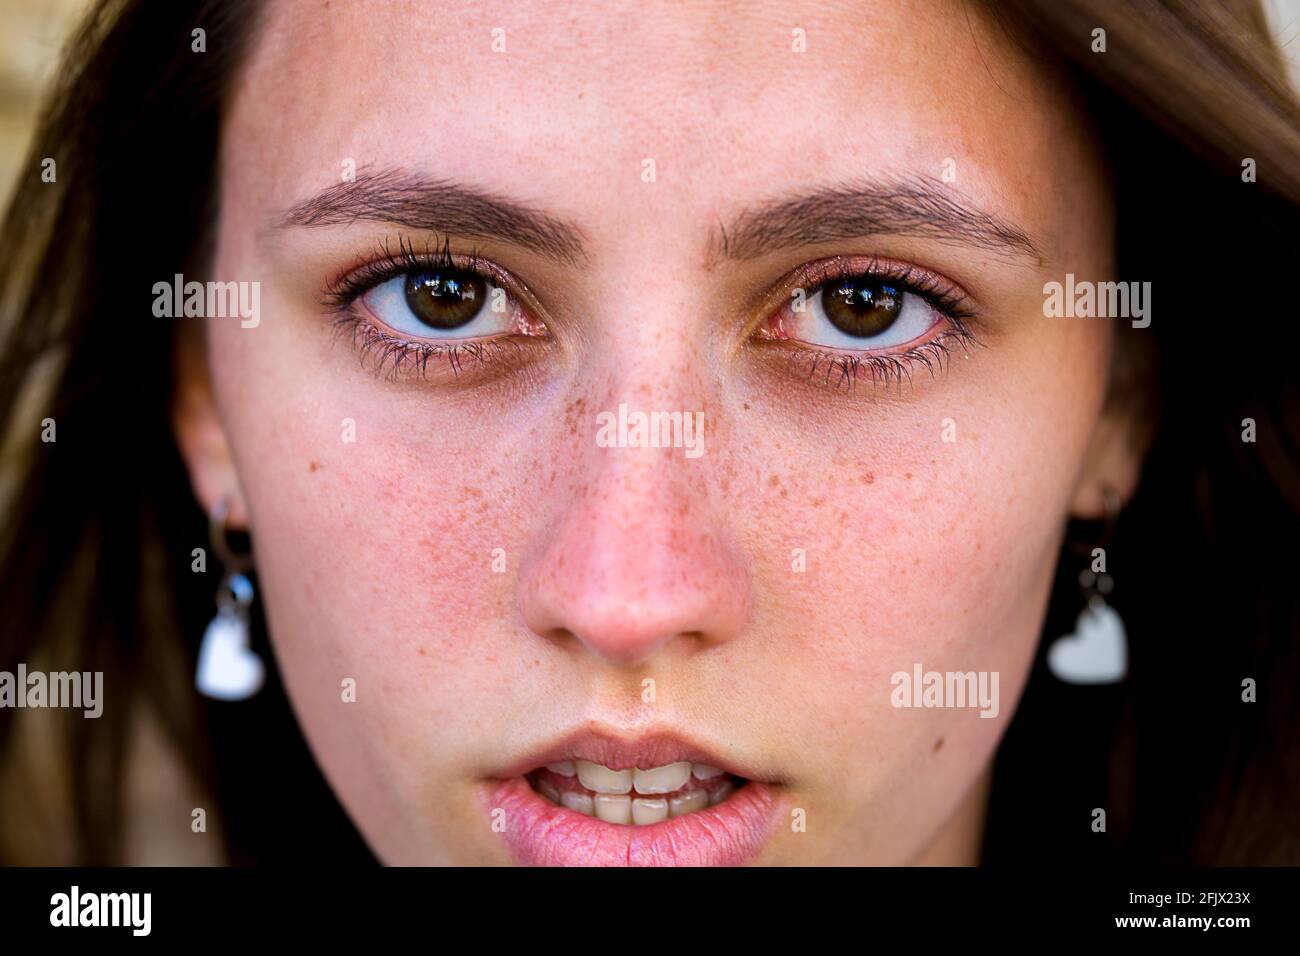 Closeup Portraits of a Dark Blonde Young Woman Stock Photo